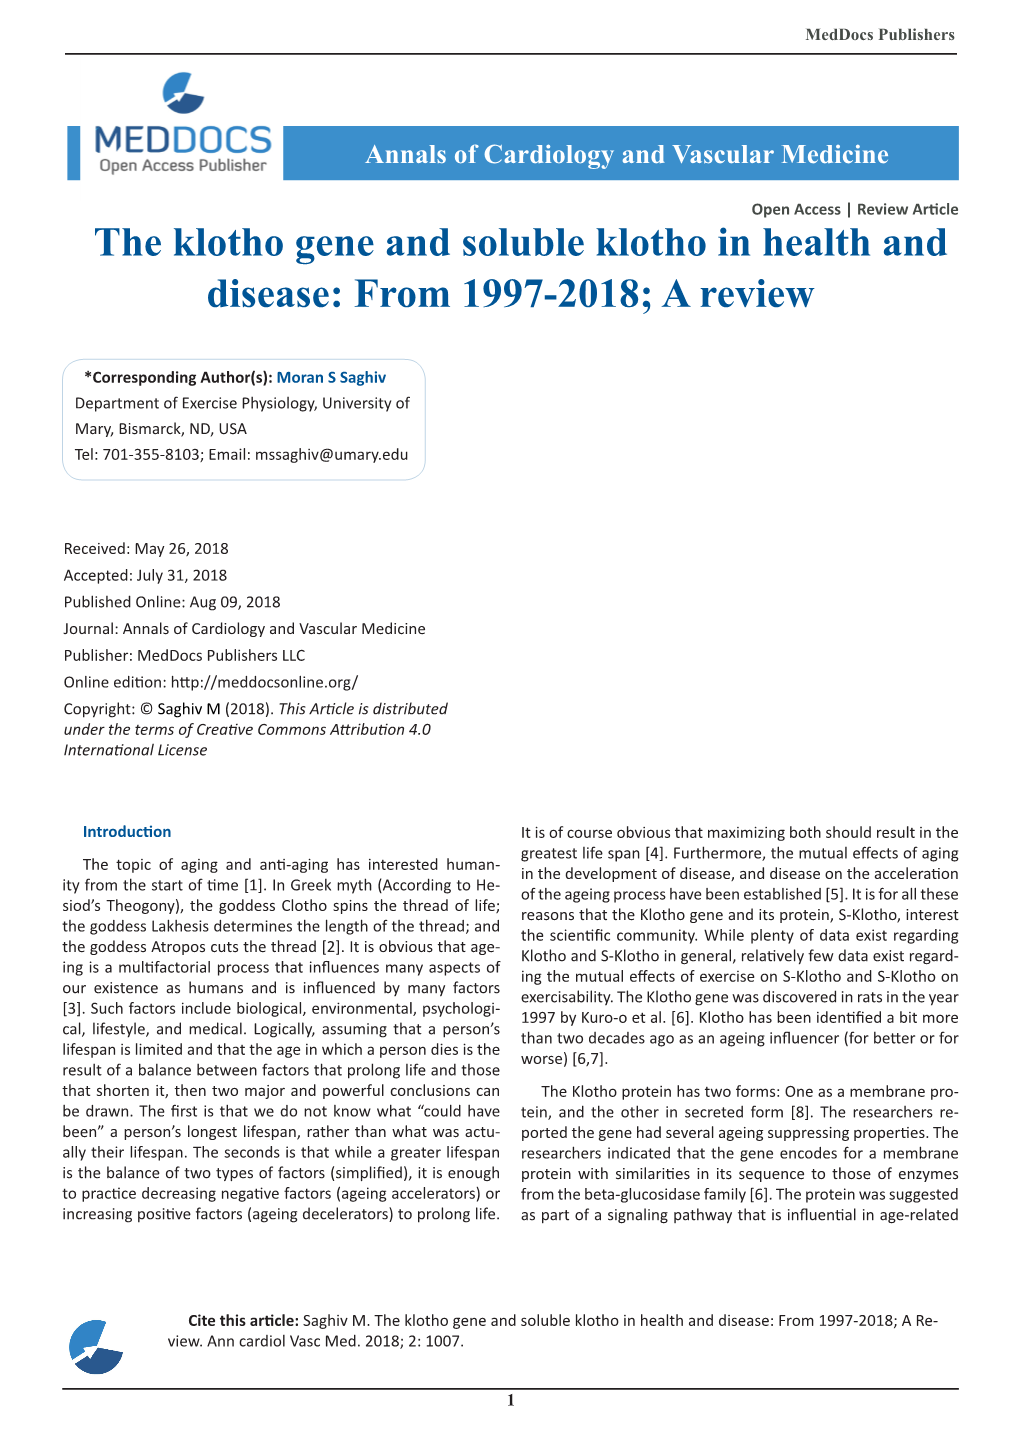 The Klotho Gene and Soluble Klotho in Health and Disease: from 1997-2018; a Review